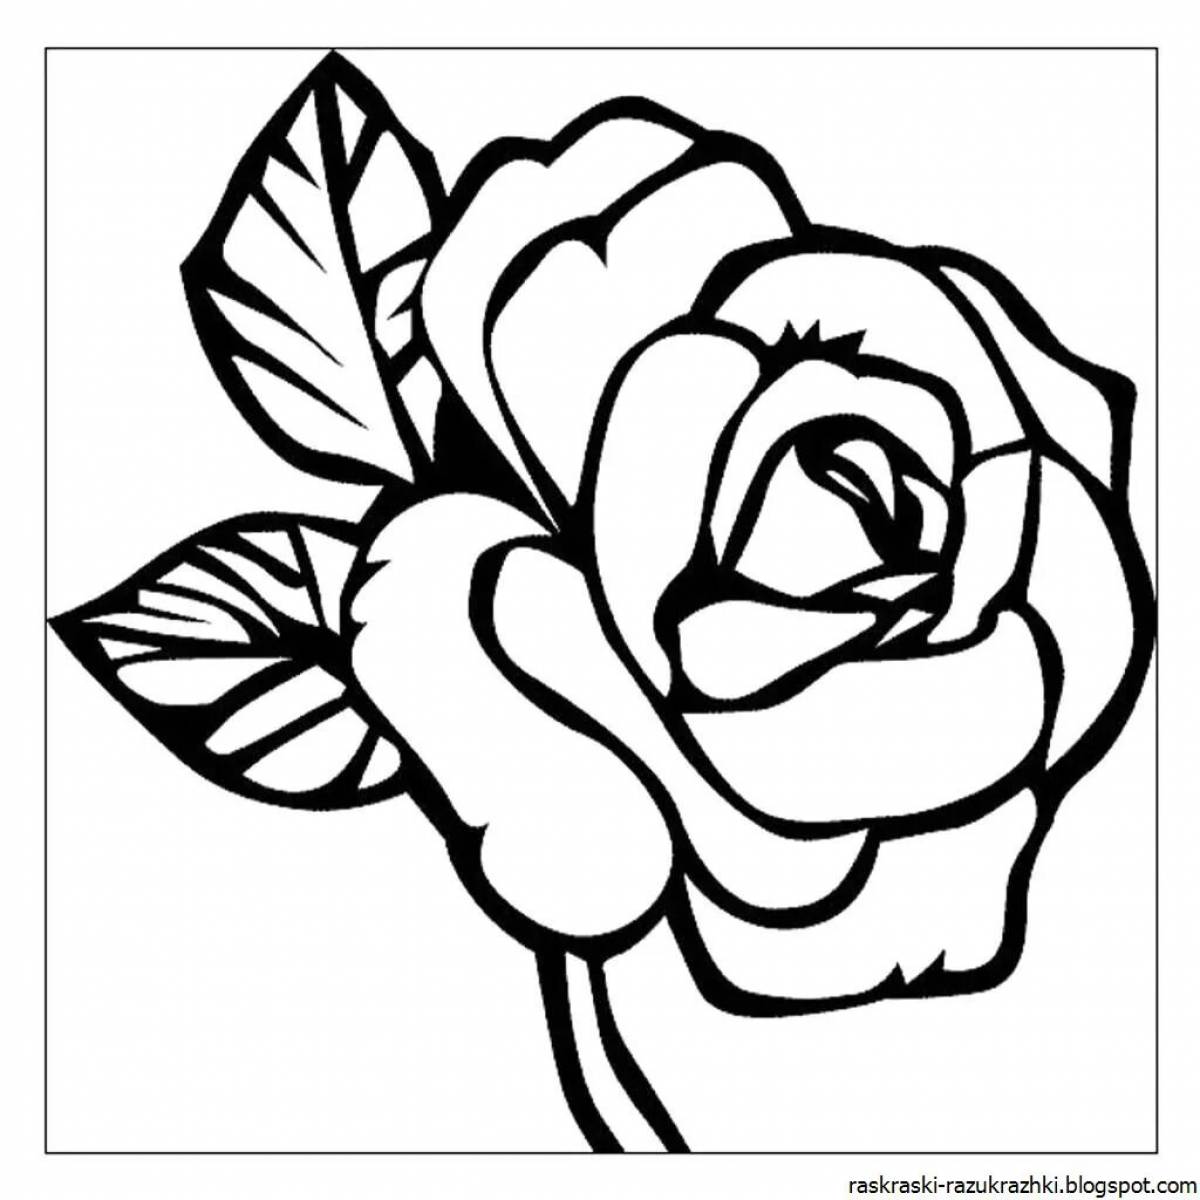 Jolly rose coloring for girls